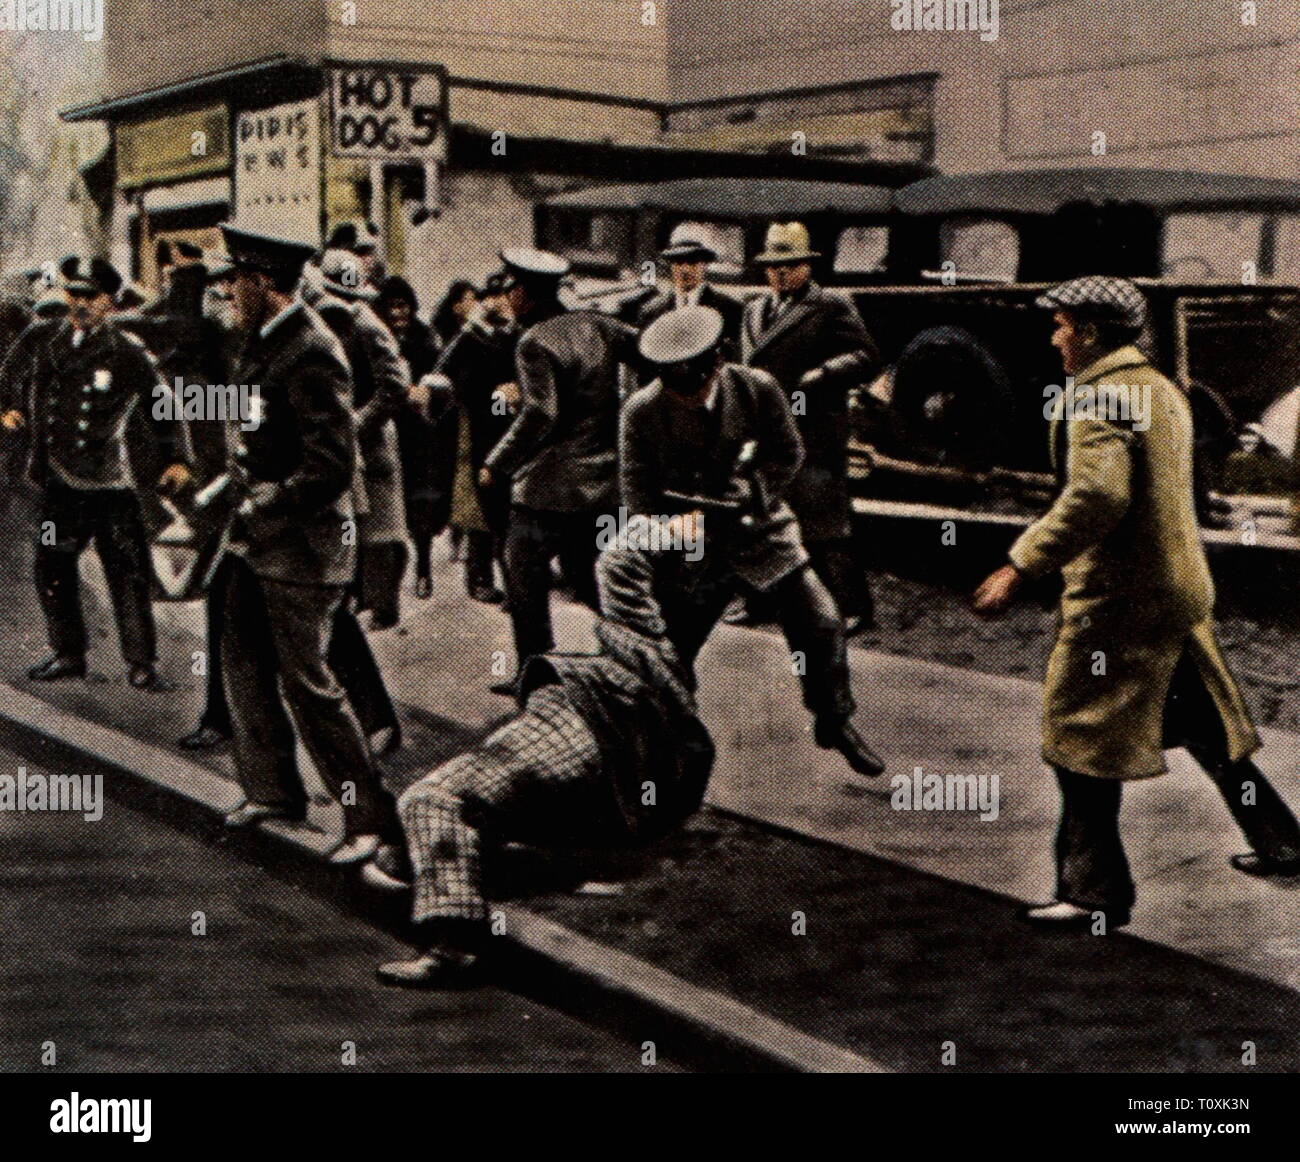 politics, demonstrations, USA, food riot in Minneapolis, Minnesota, February 1931, police is advancing forcibly against demonstrators, coloured photograph, cigarette card, series 'Die Nachkriegszeit', 1935, world depression, world depressions, crisis, crises, food scareness, food shortage, hunger, hungriness, riot, riots, affray, unemployed, nonworker, workless, unemployed people, unemployment, poverty, violence, protest, protests, people, 20th century, 1930s, politics, policy, demonstrations, demos, demonstration, demo, USA, United States of Ame, Additional-Rights-Clearance-Info-Not-Available Stock Photo